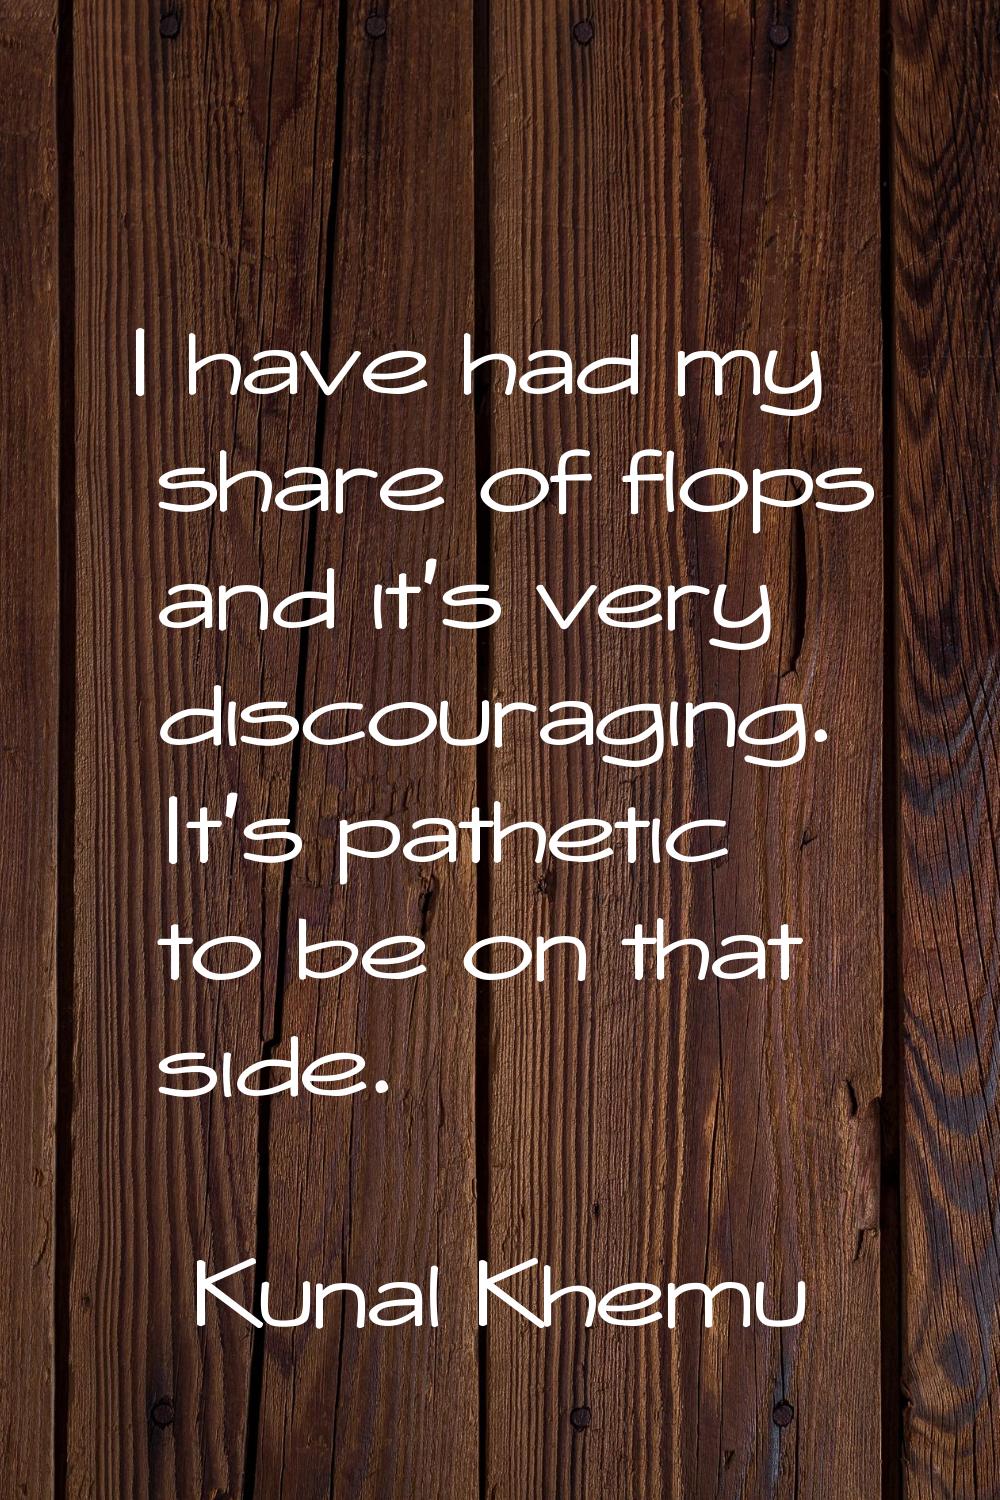 I have had my share of flops and it's very discouraging. It's pathetic to be on that side.